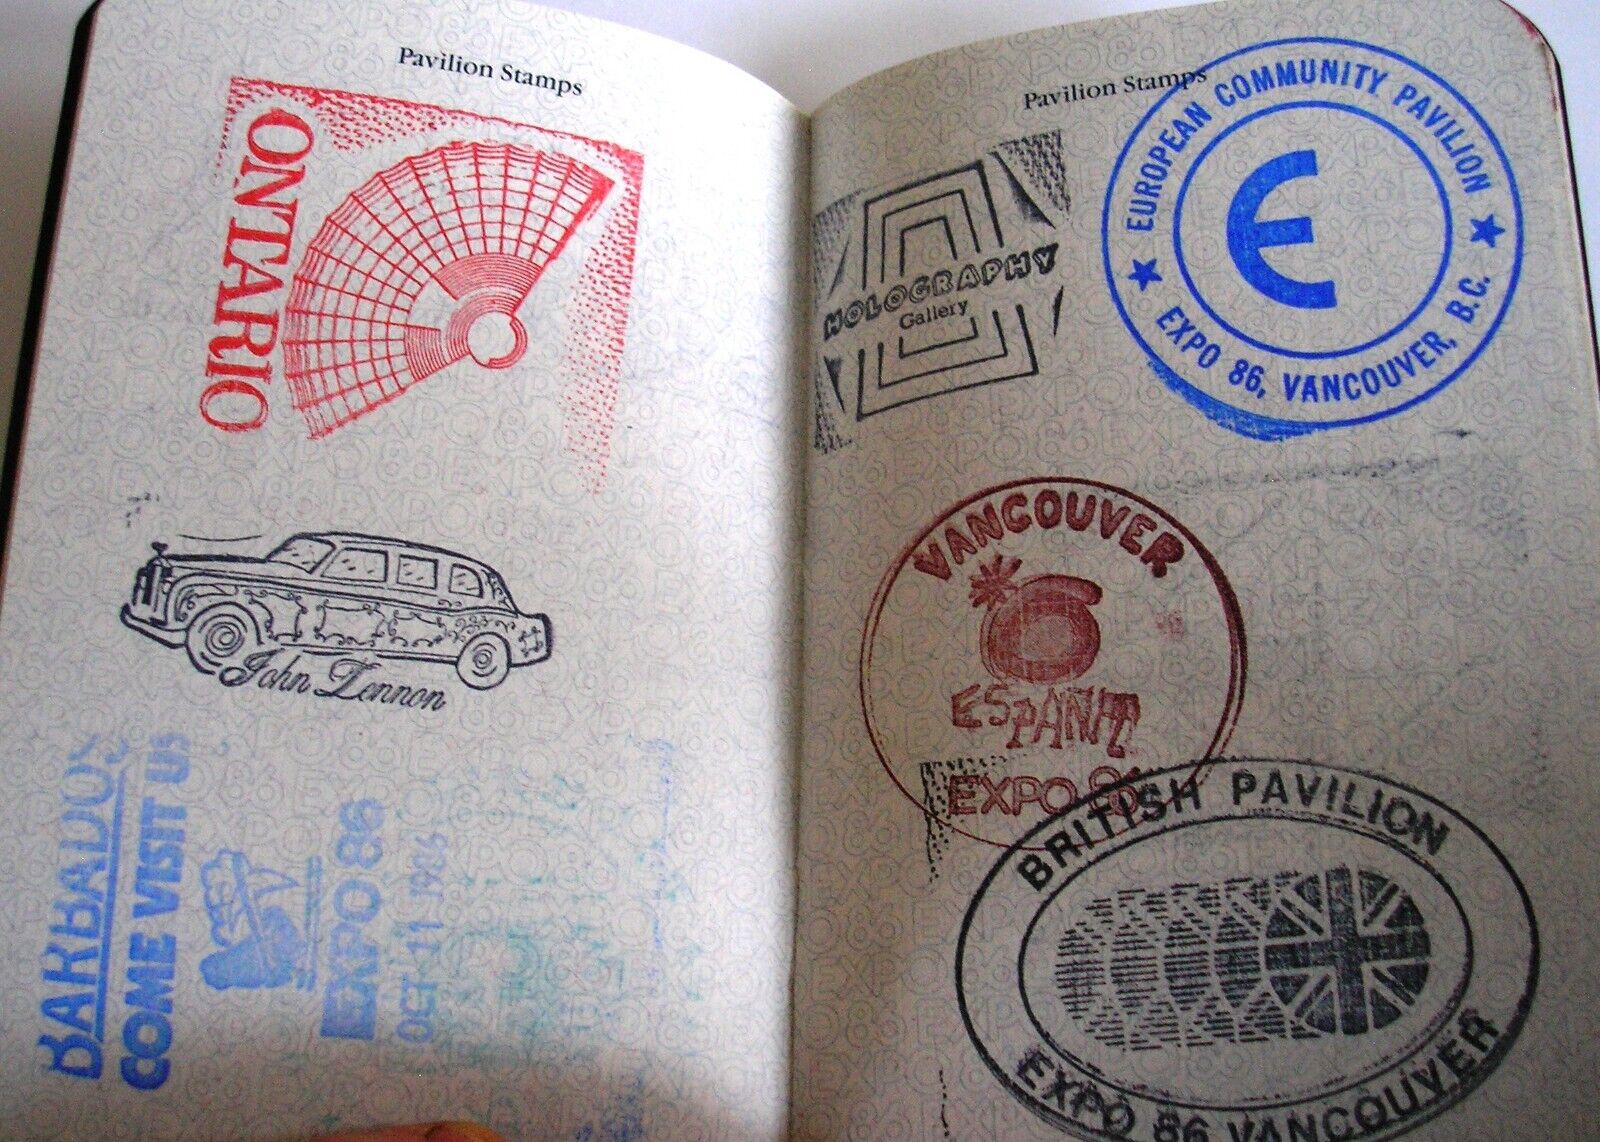 1986 WORLD EXPOSITION - EXPO 86 - VANCOUVER CANADA - PASSPORT LOT OF 2 - 